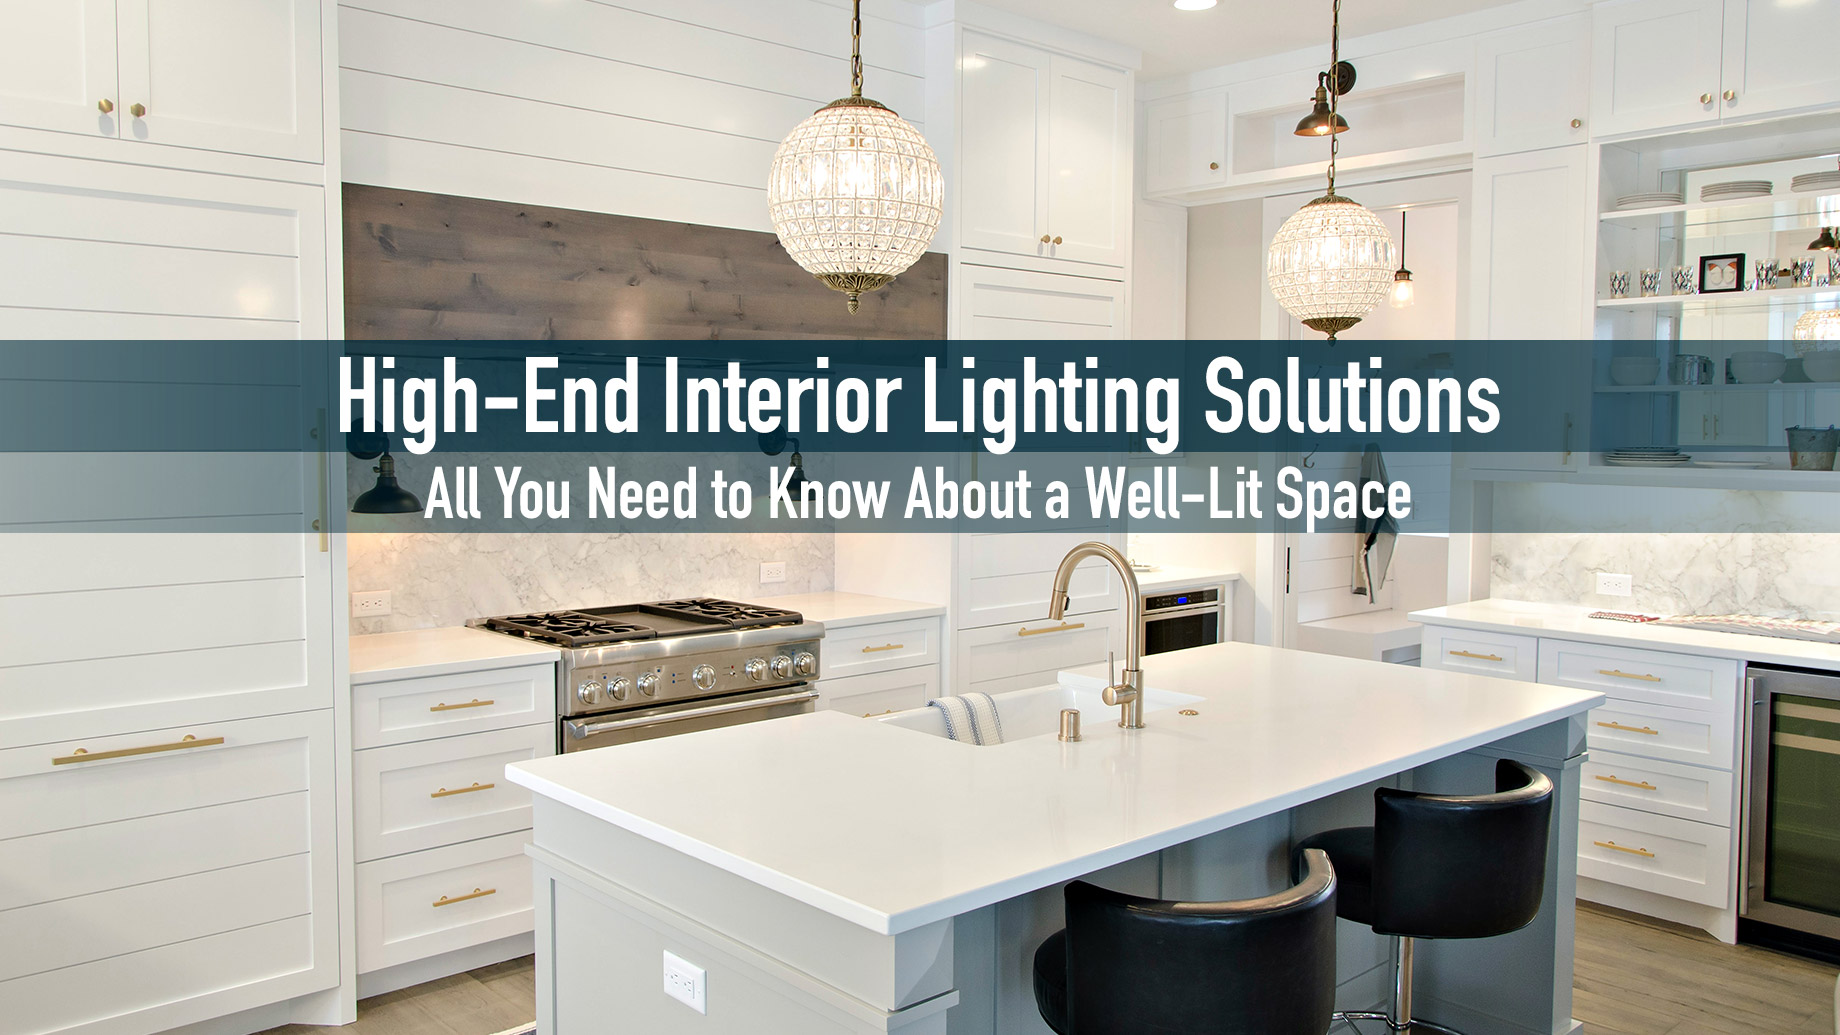 High-End Interior Lighting Solutions - All You Need to Know About a Well-Lit Space